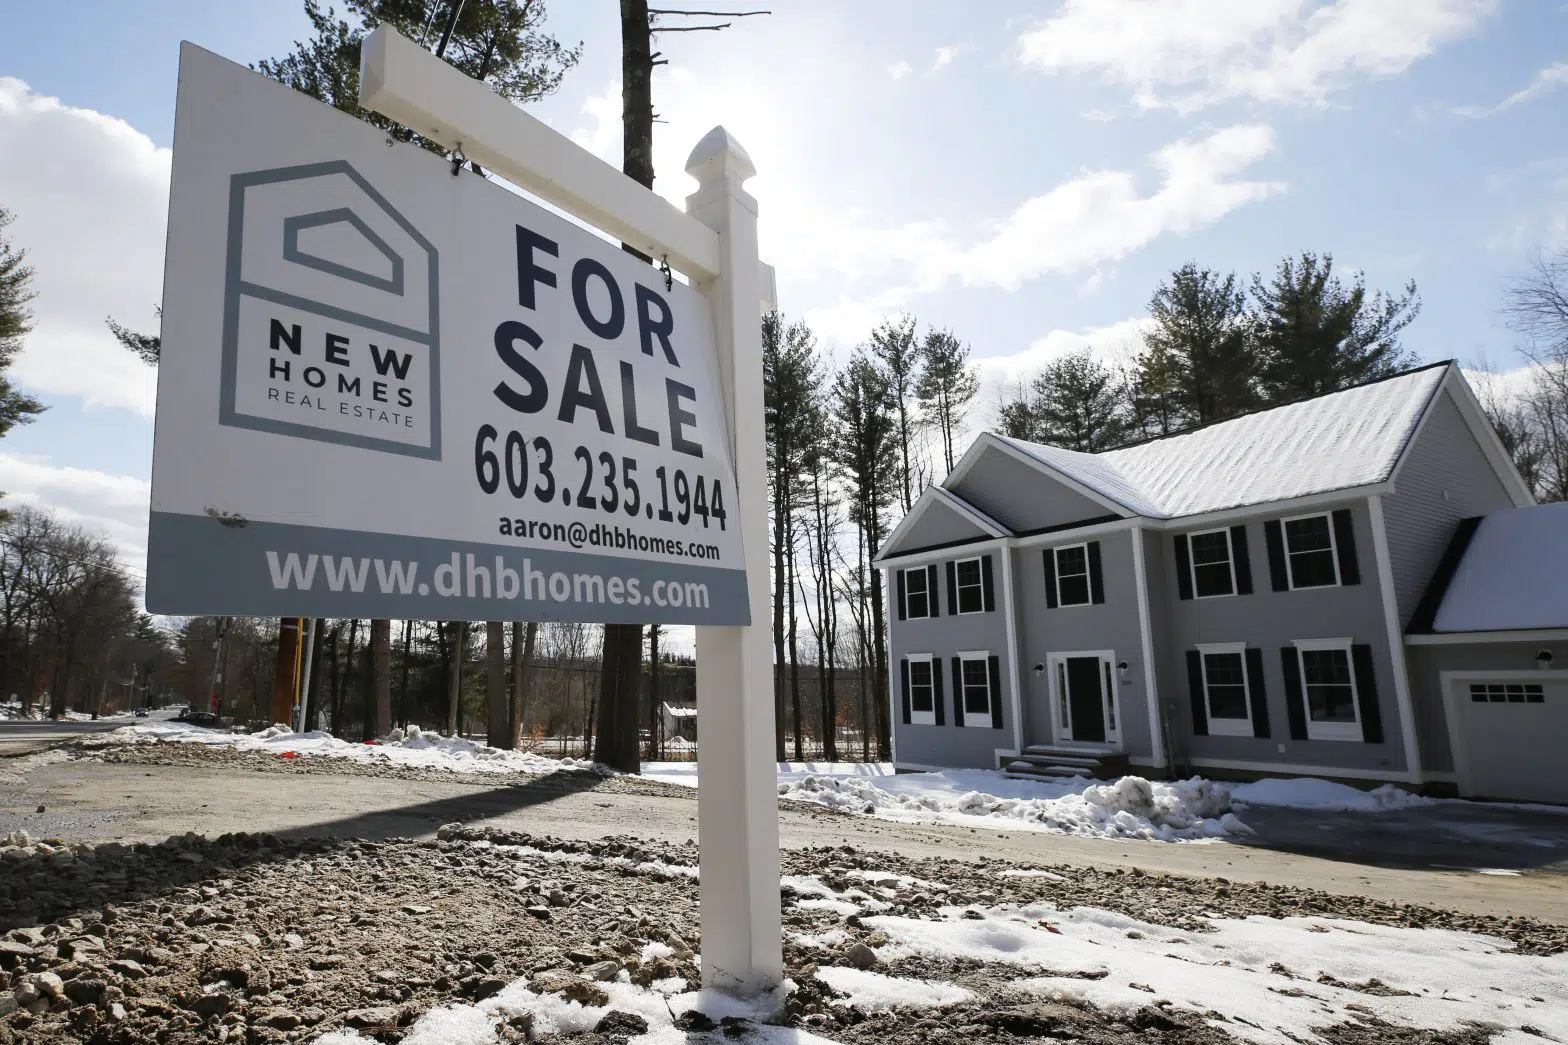 Real Estate Industry Hoping for Stimulus Aid for Non-Depository Lenders